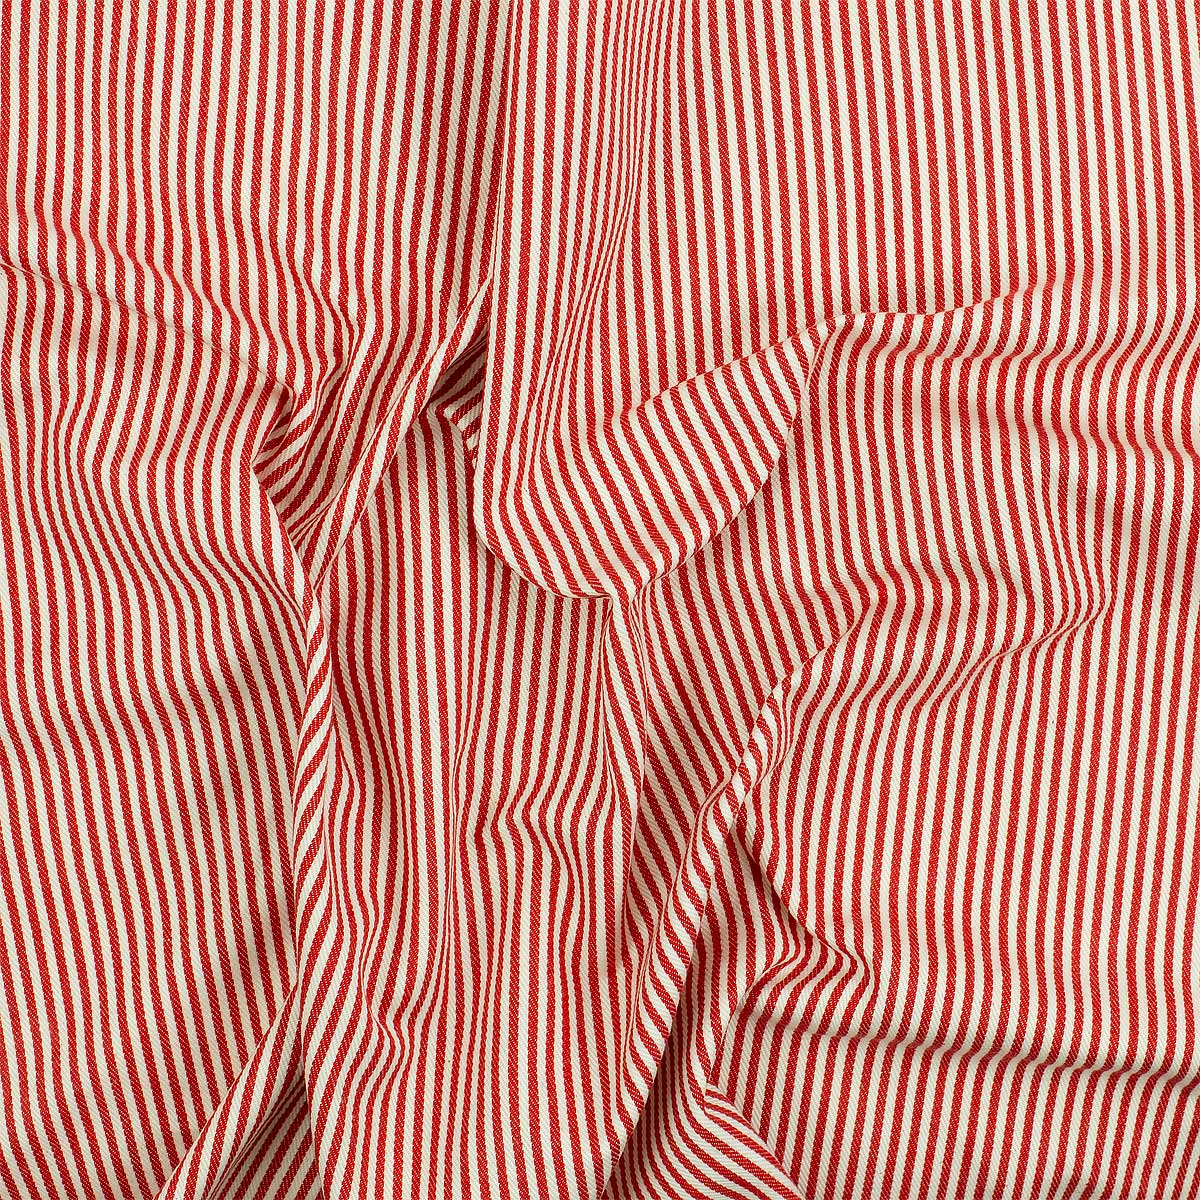 HECTOR Fabric 116 cm, red/white